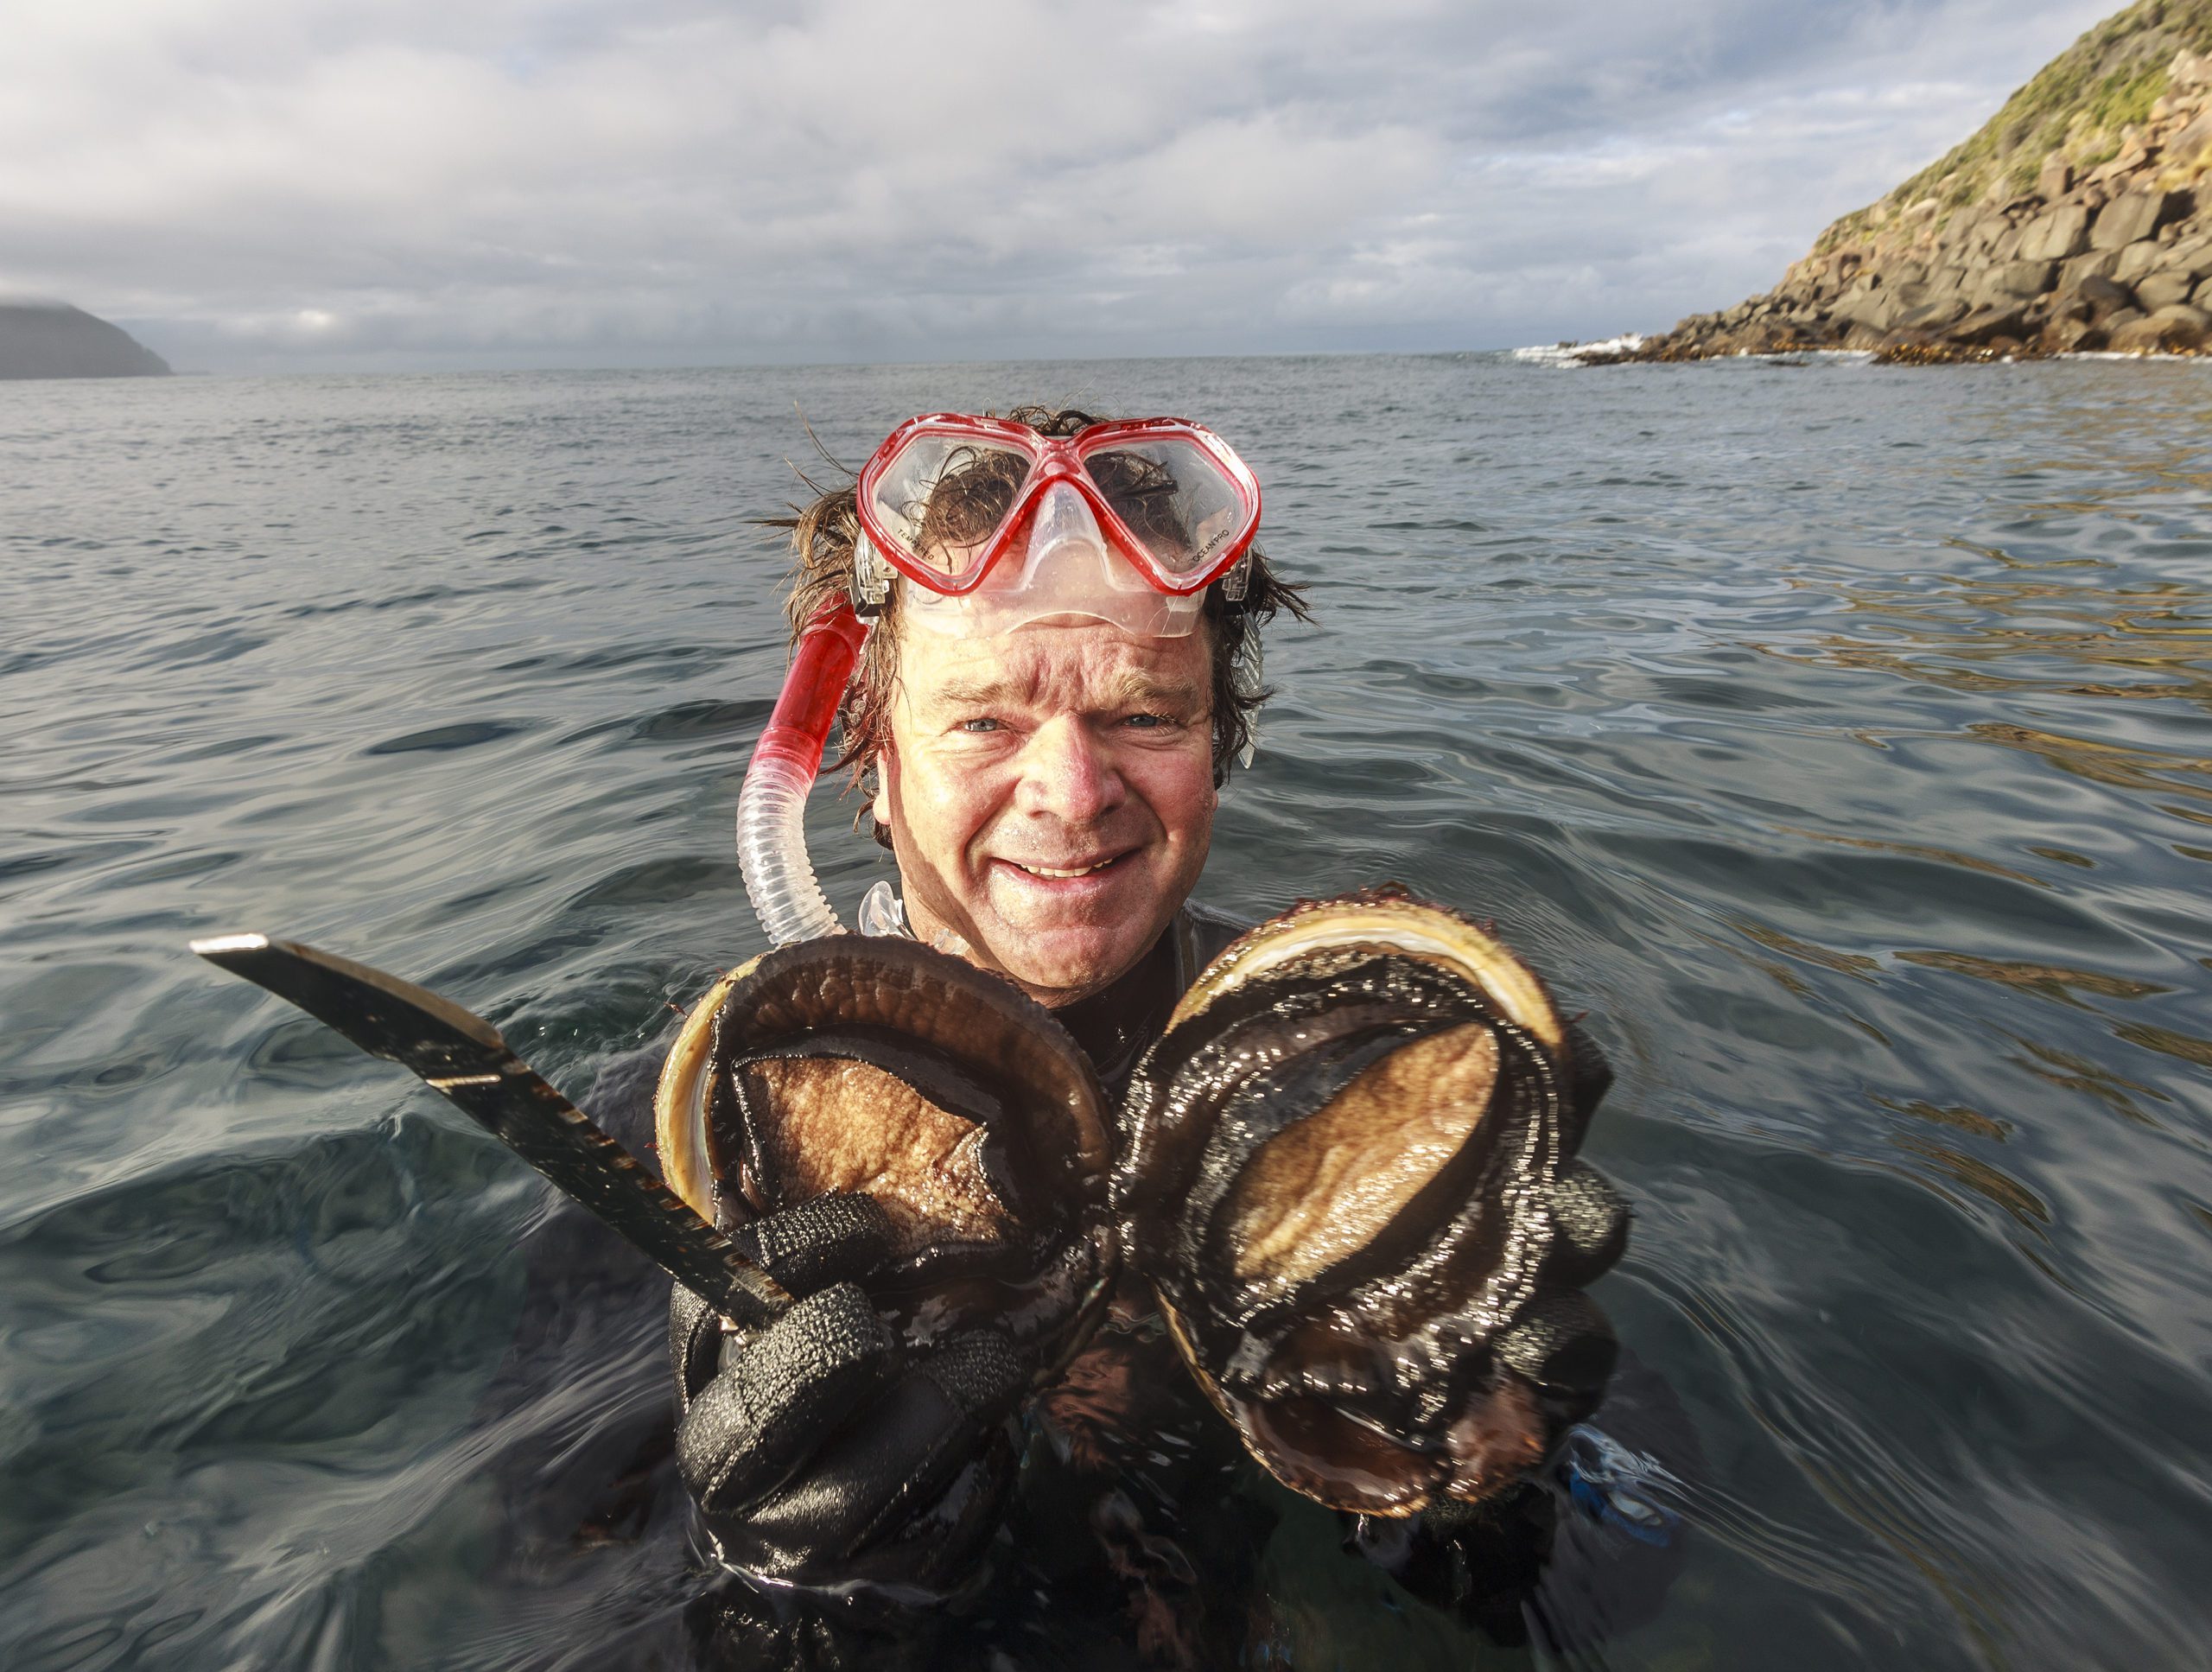 Rob Pennicott holding abalone that he retrieved while snorkeling, intended to be eaten.